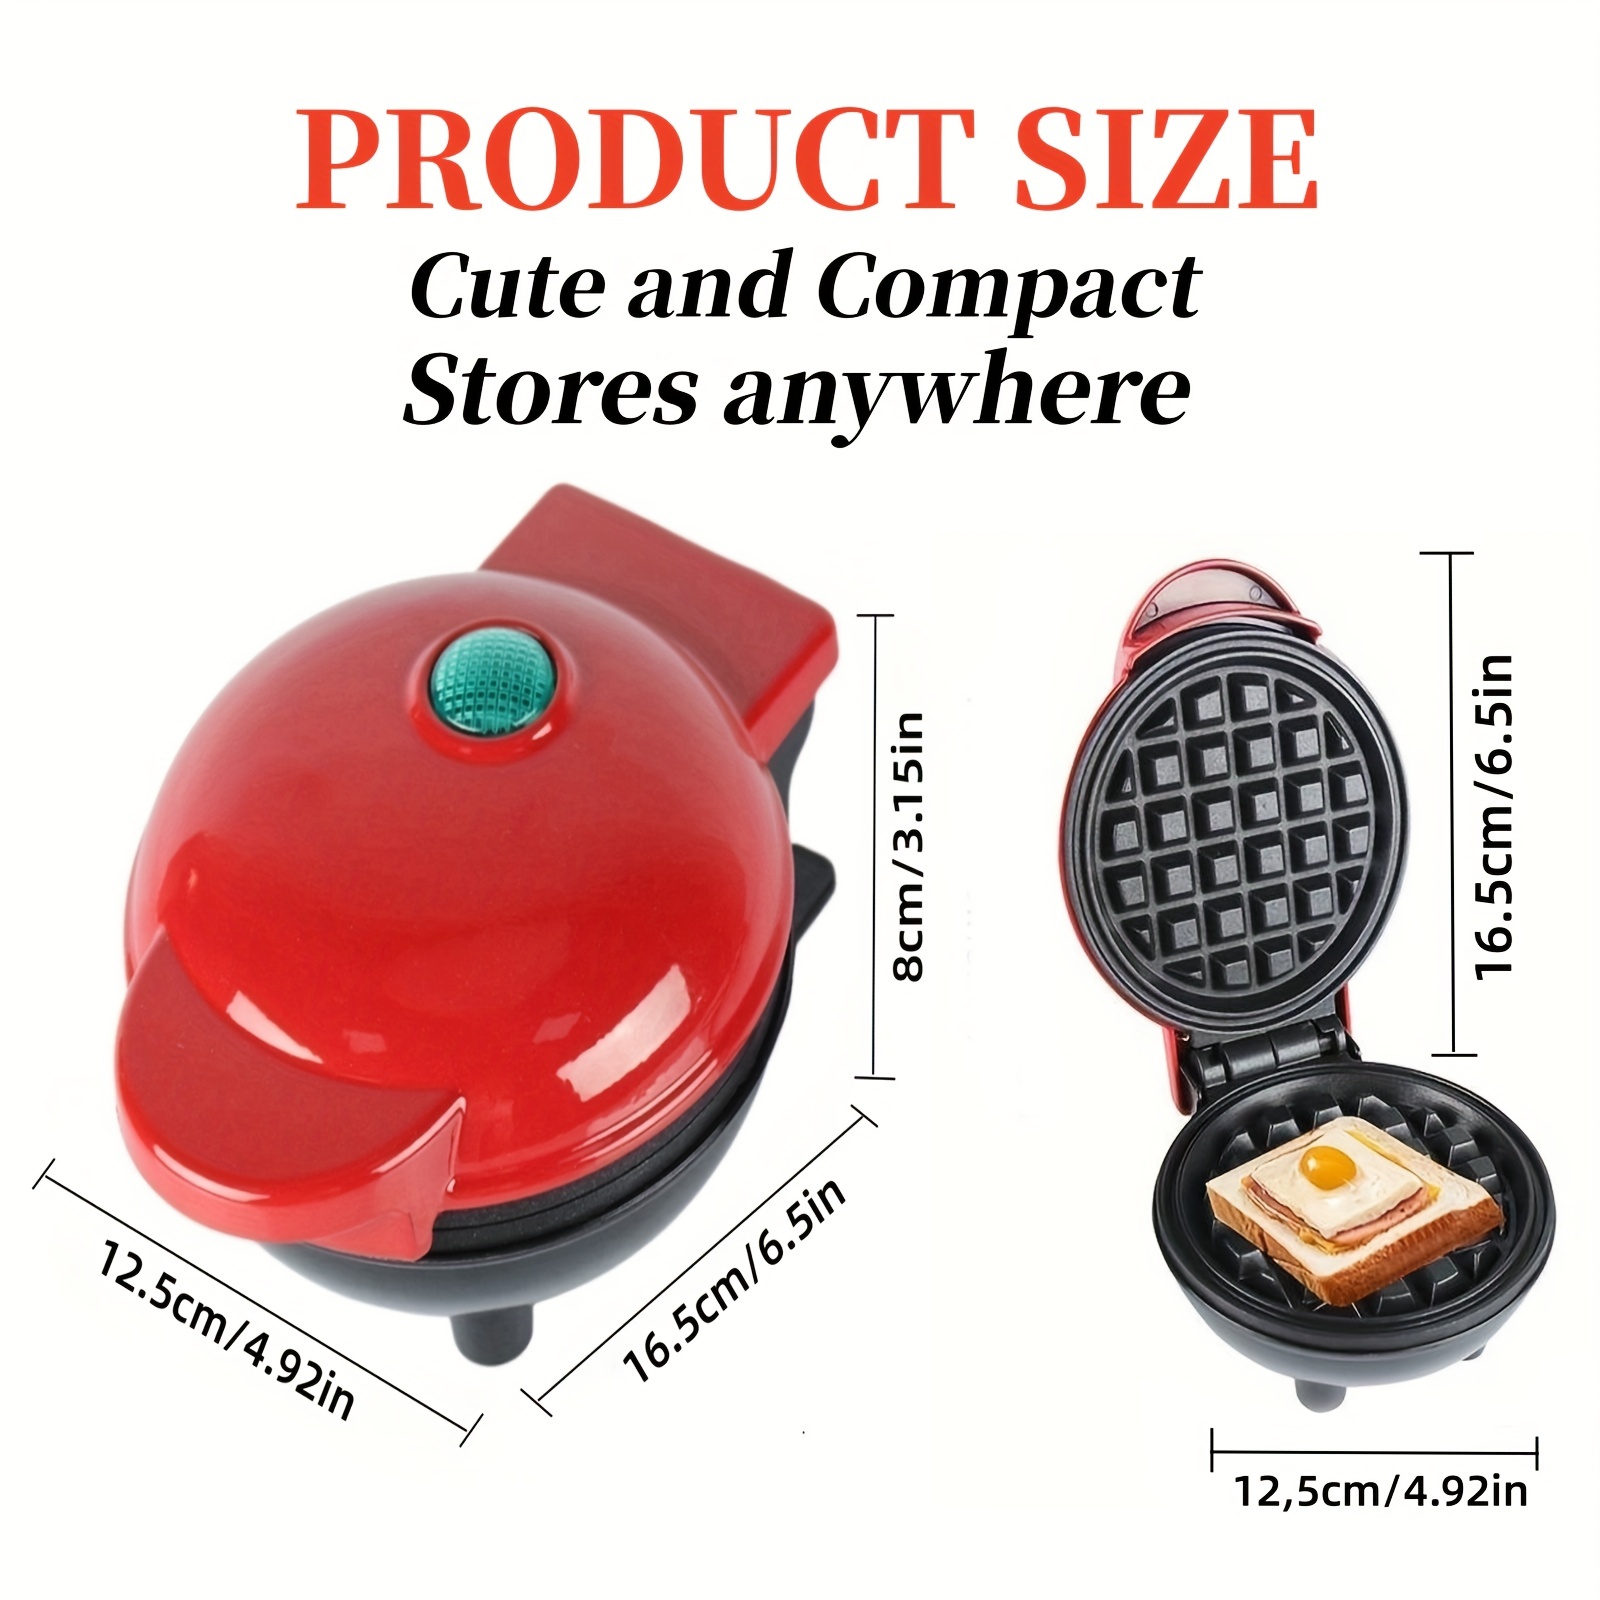 Mini Waffle Maker Portable Electric Round Waffle Maker Grill Machine for Individual Pancakes, Cookies, Eggs Individual Waffles, Paninis, Hash Browns